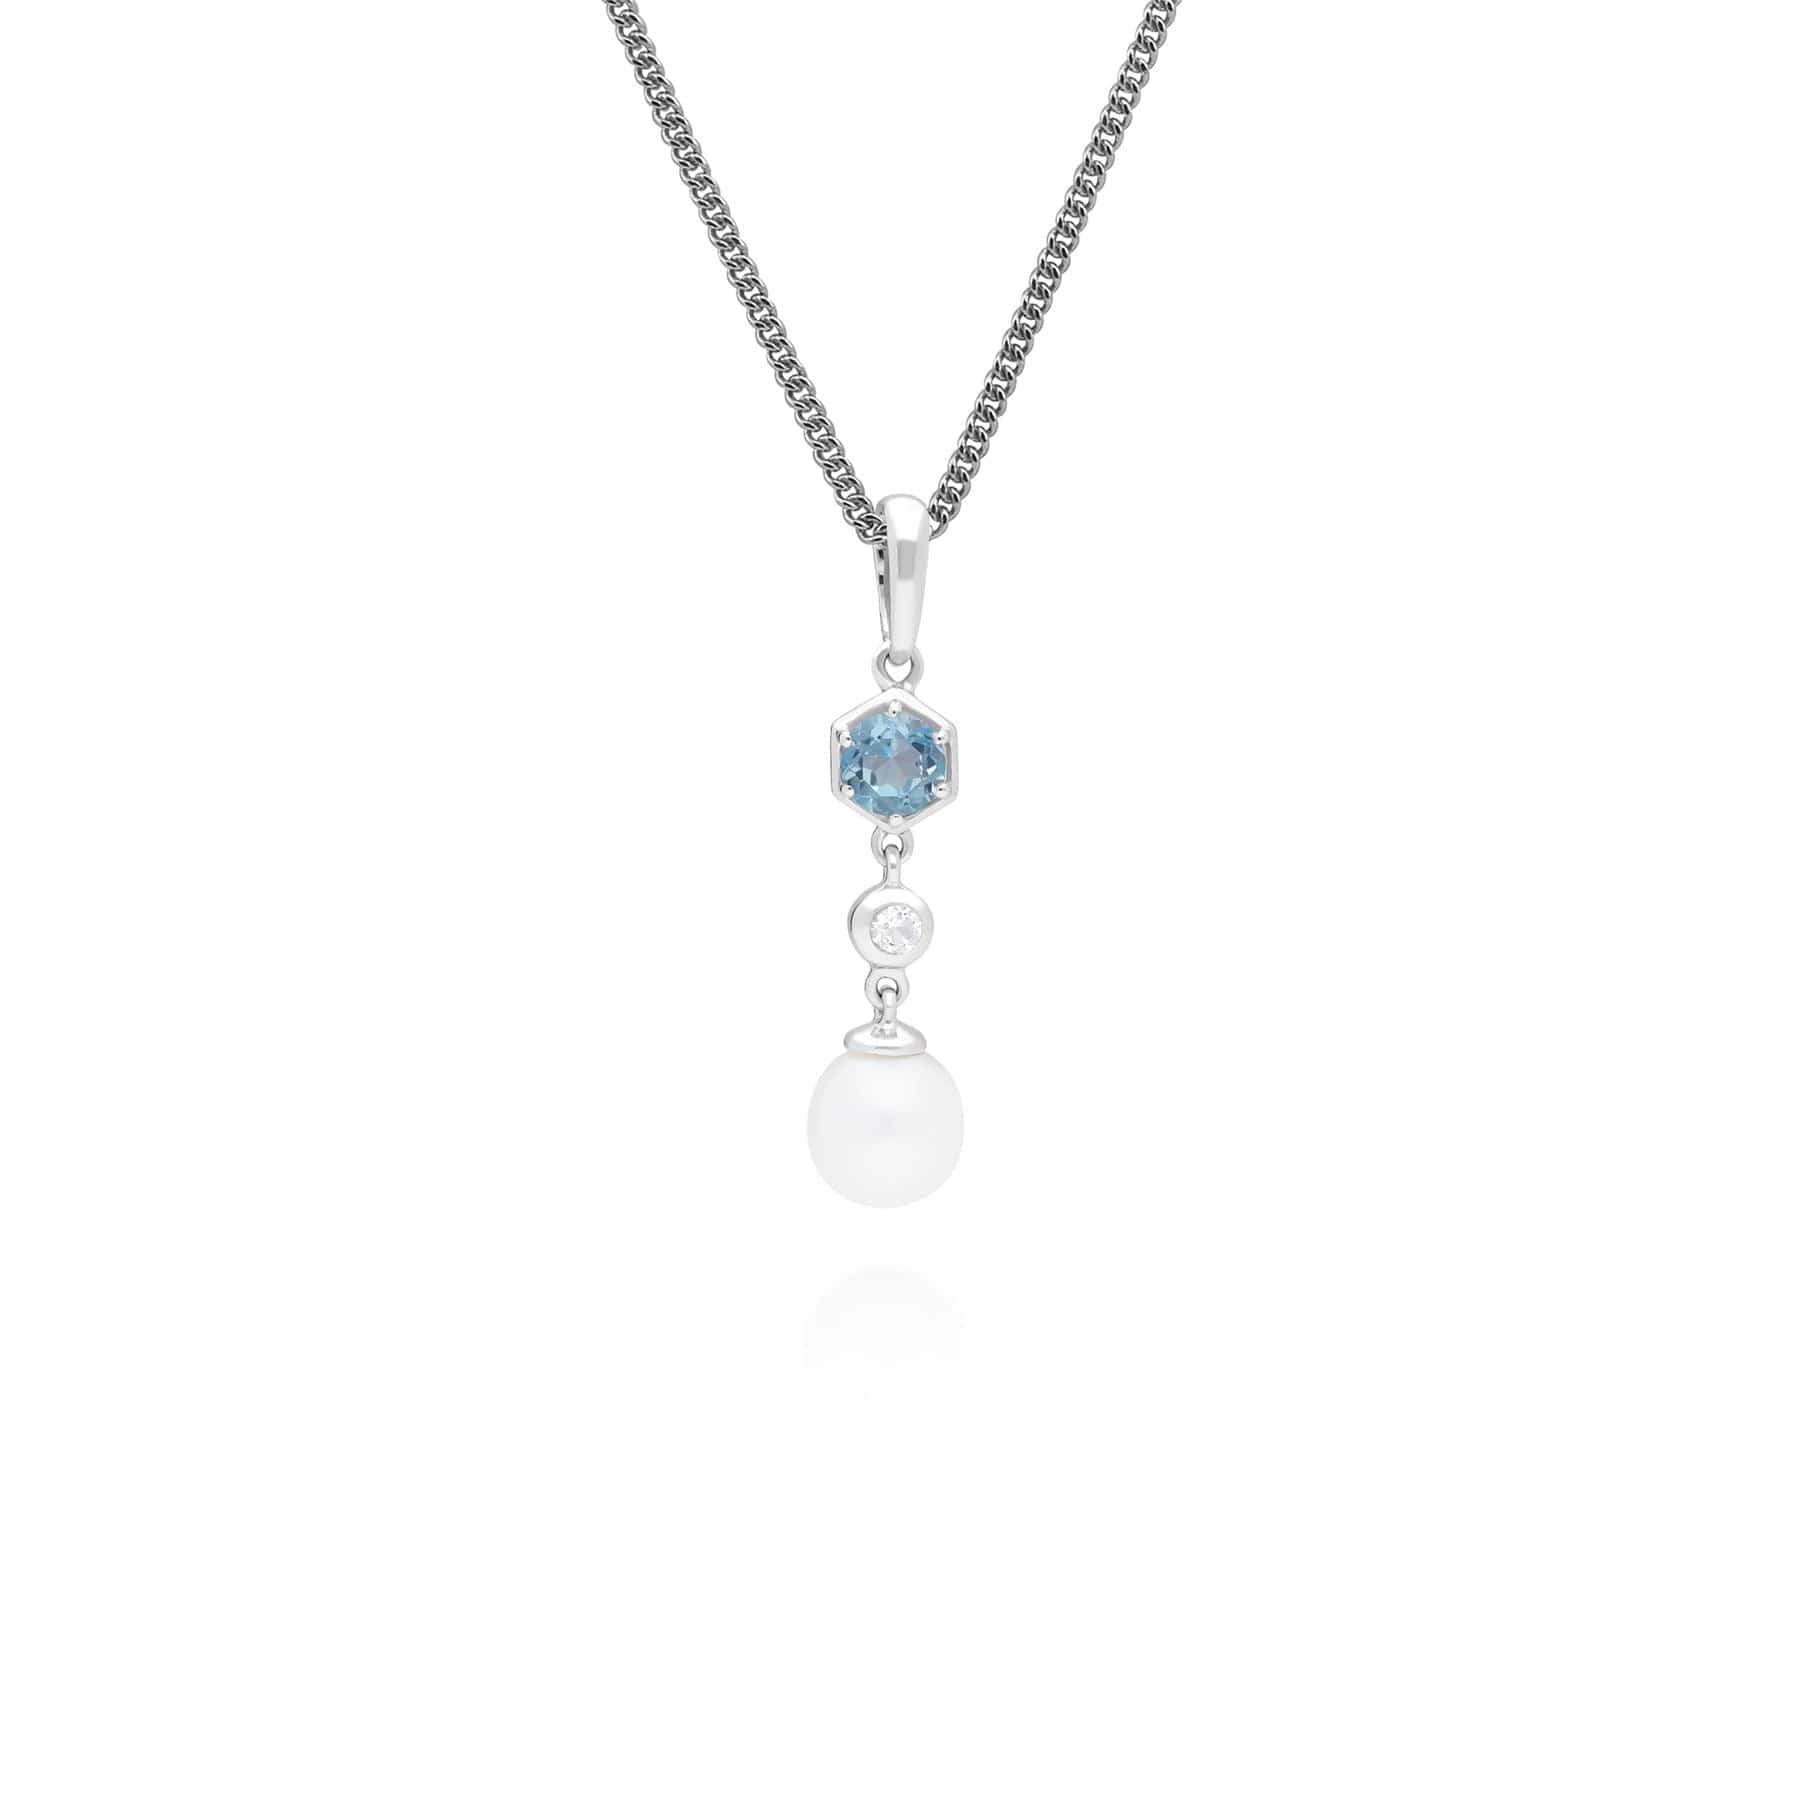 Photos - Pendant / Choker Necklace Modern Pearl & Blue Topaz Drop Pendant in 925 Sterling Silver